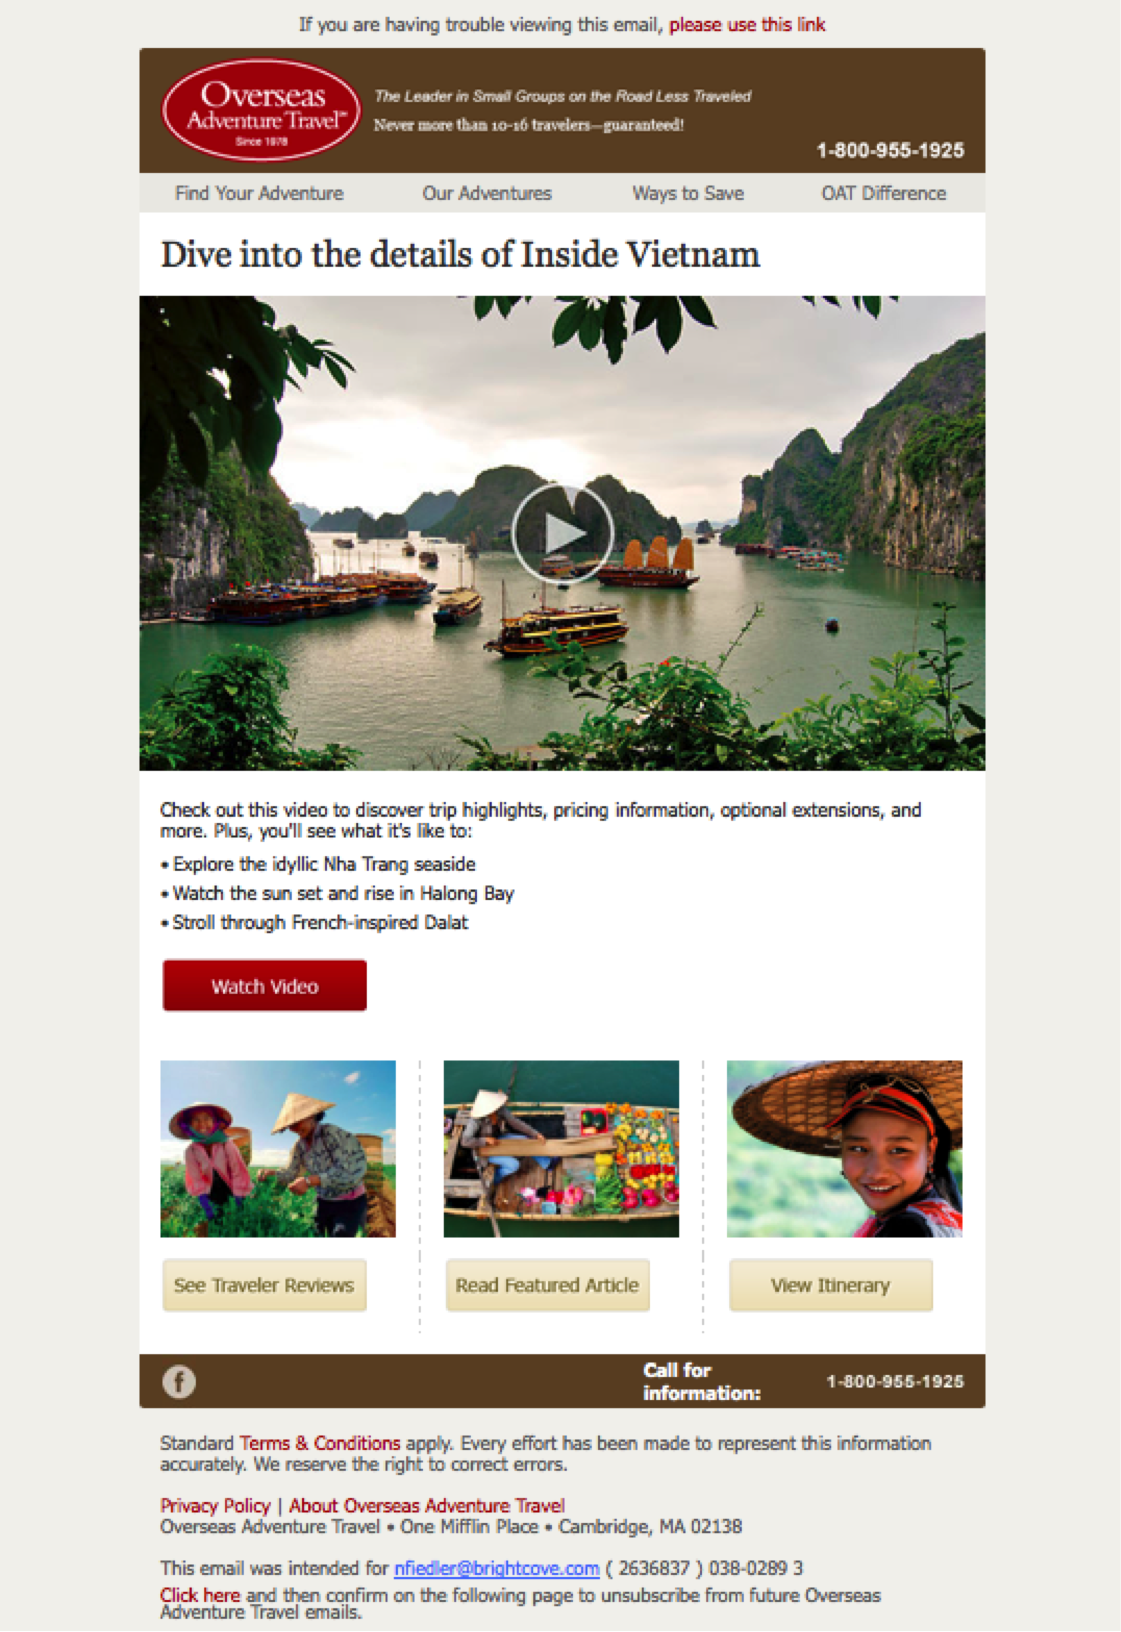 Overseas Adventure Travel Email campaign with a link to watch a travel video